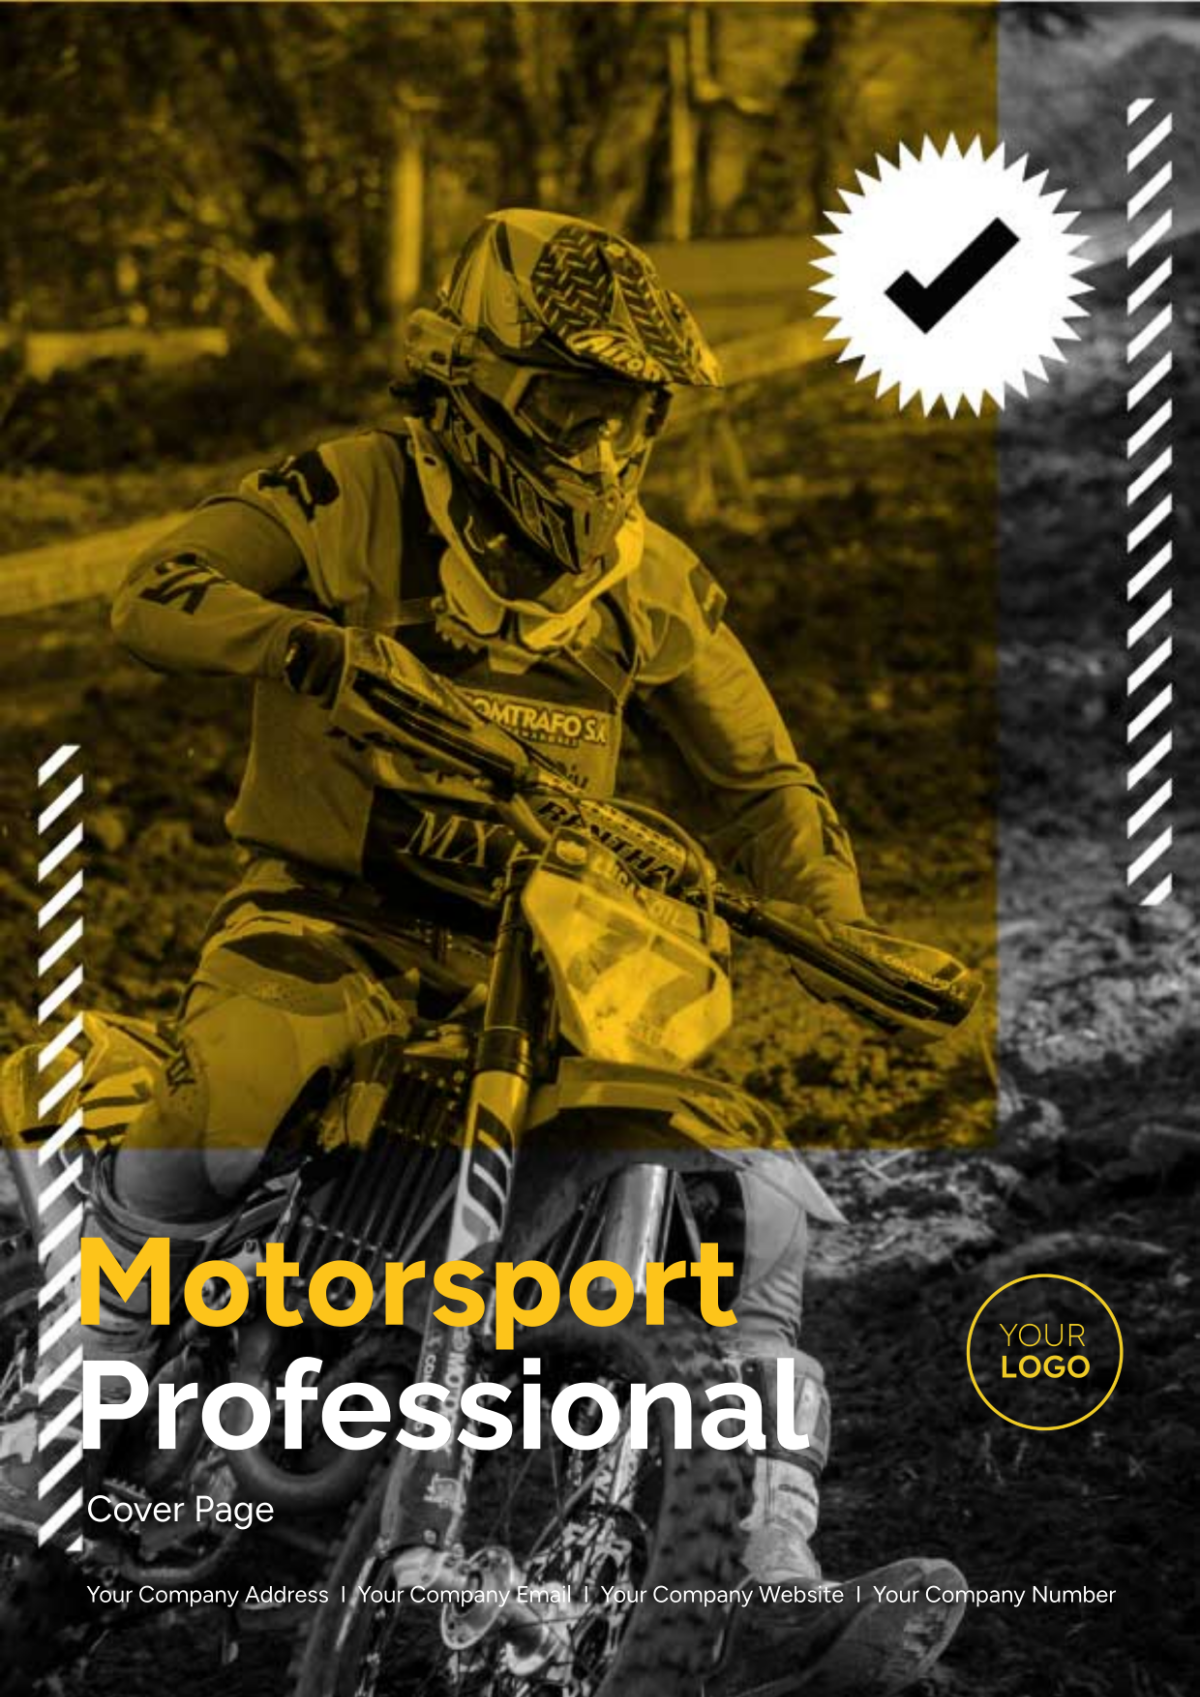 Motorsport Professional Cover Page